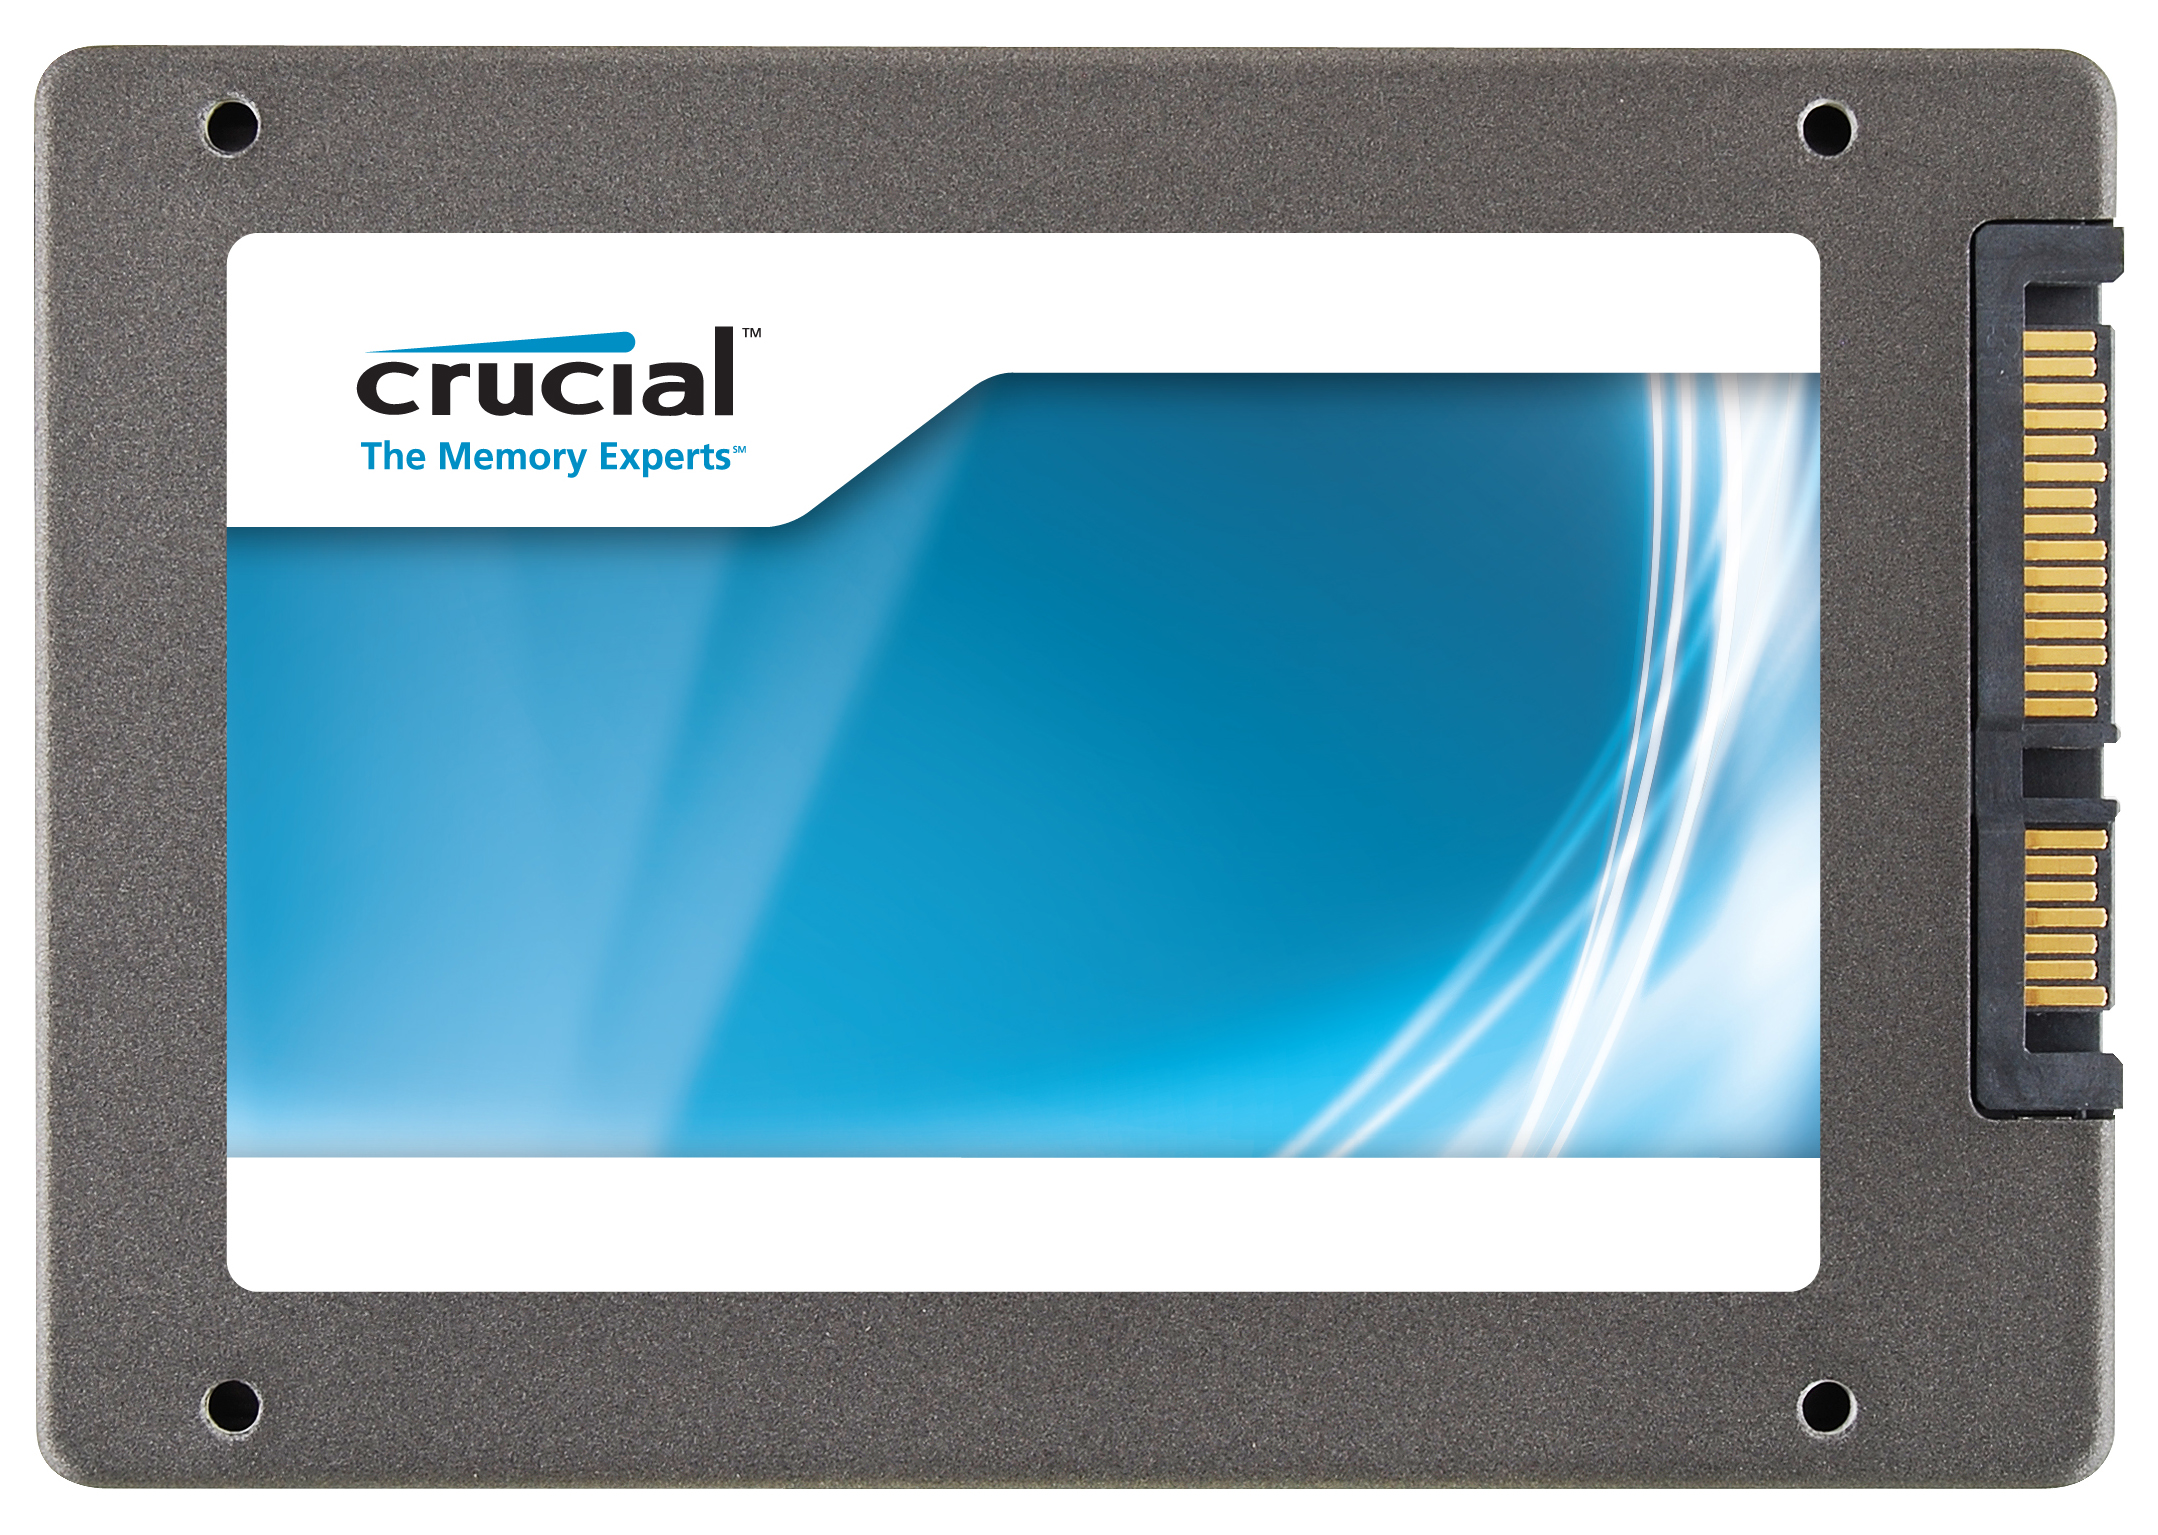 CT064M4SSD1CCA Crucial M4 Series 64GB MLC SATA 6Gbps 2.5-inch Internal Solid State Drive (SSD) with Data Transfer Kit